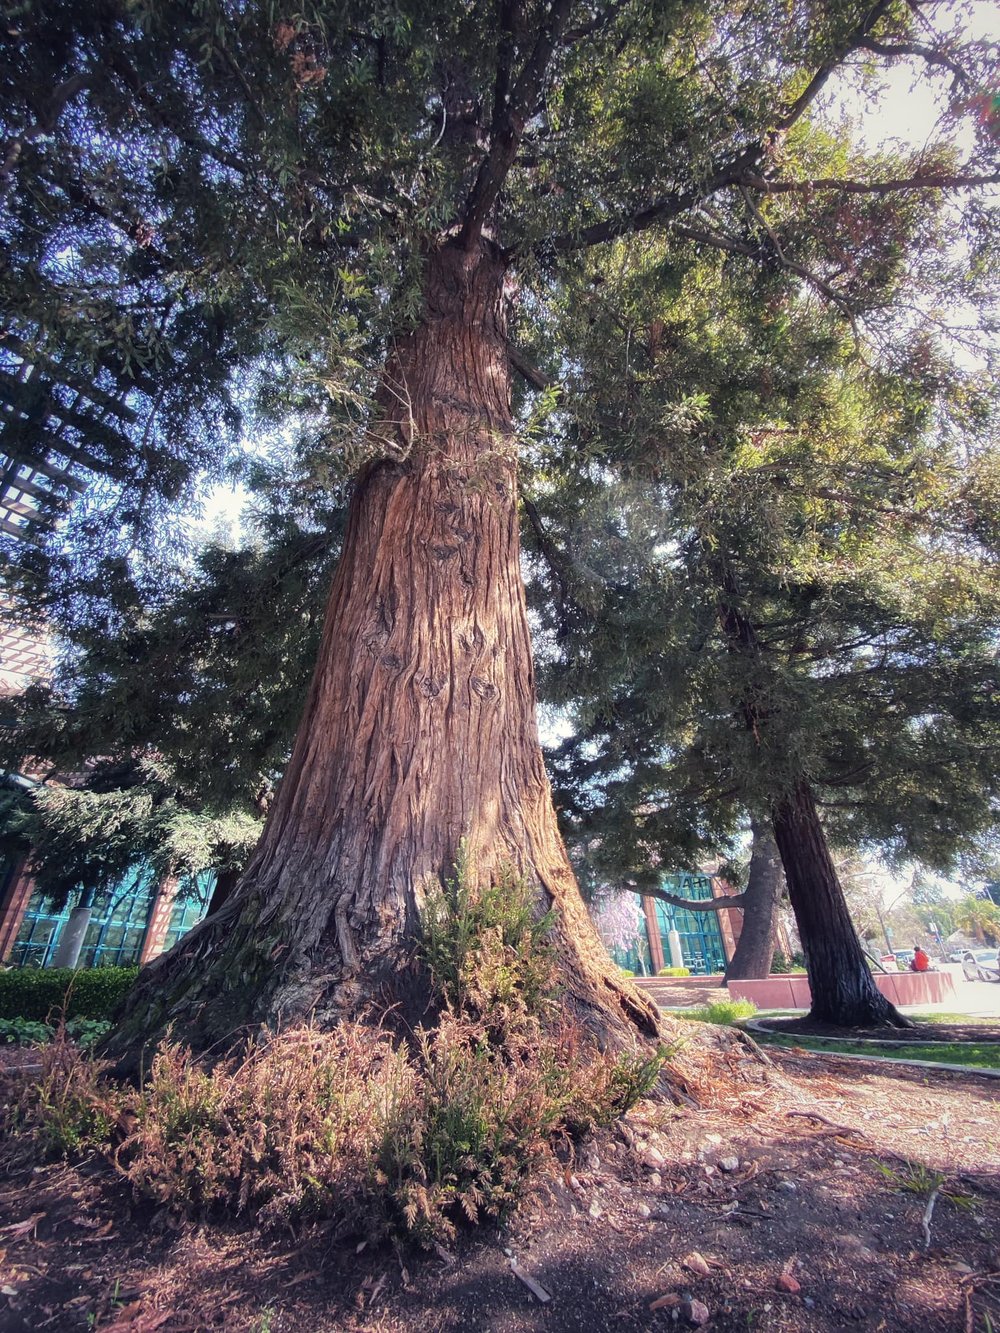  Truth in advertising: a redwood tree in Redwood City. 